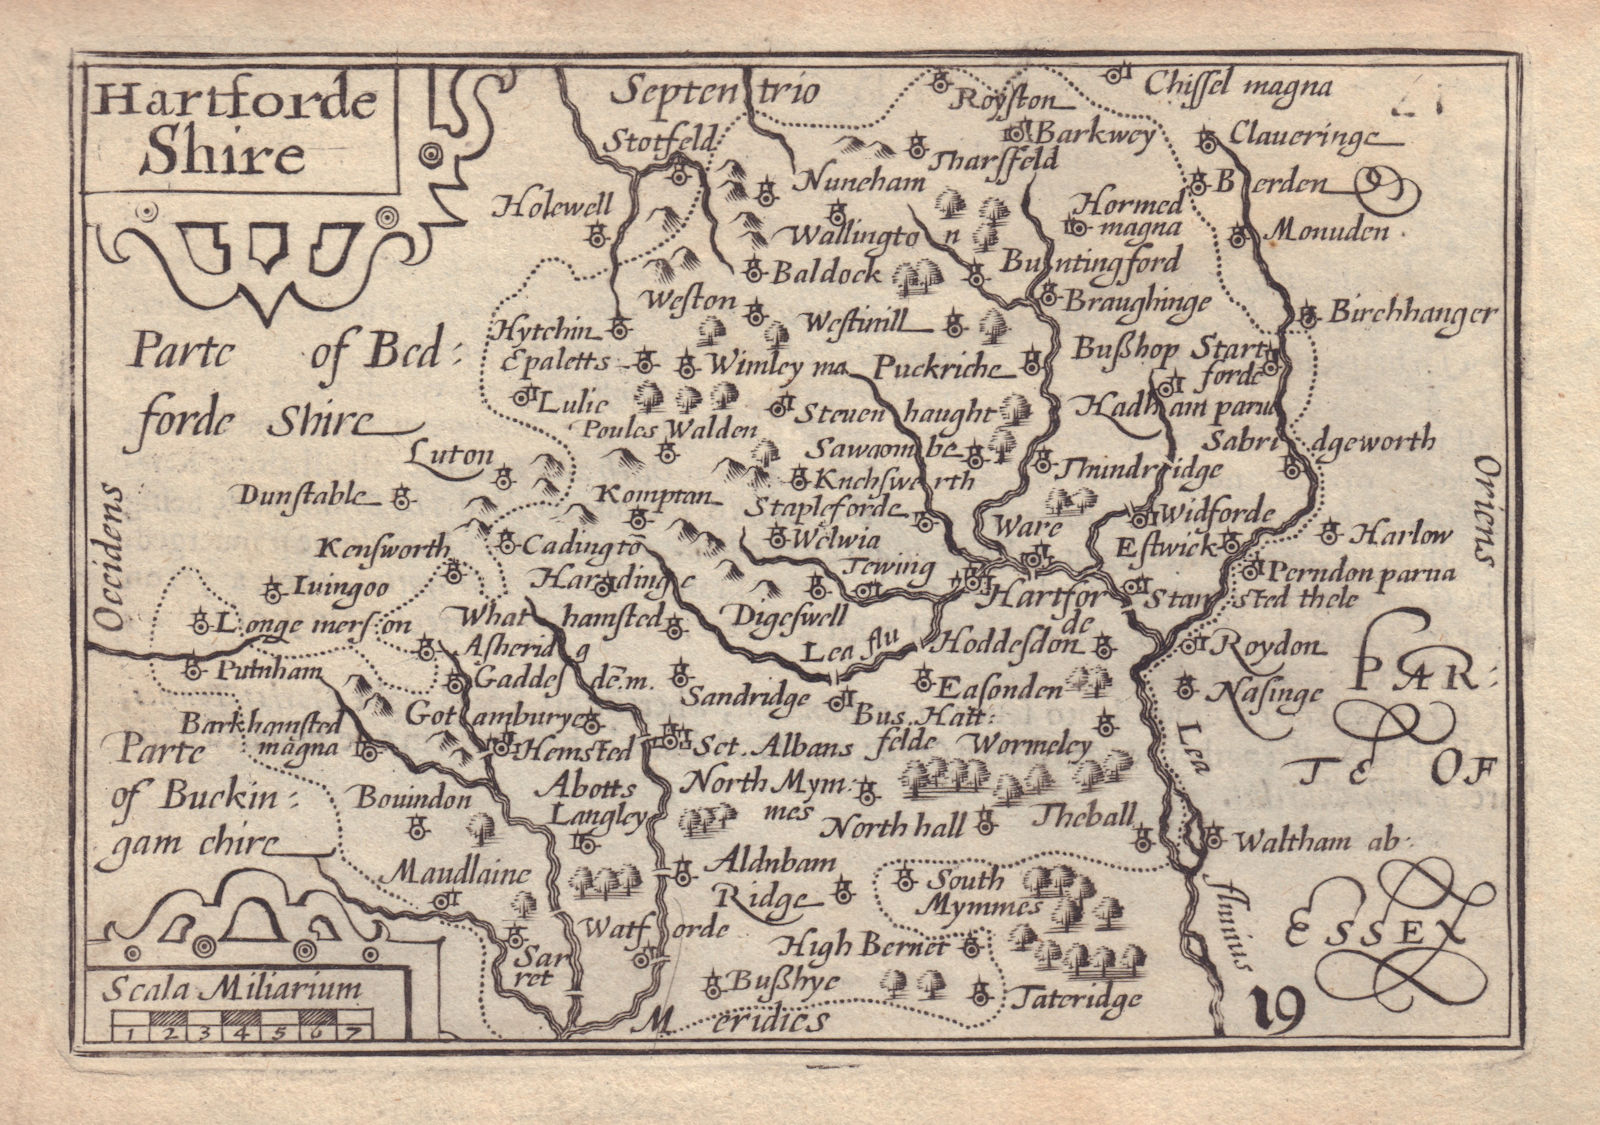 Associate Product Hartforde Shire by Keere. "Speed miniature" Hertfordshire county map 1632